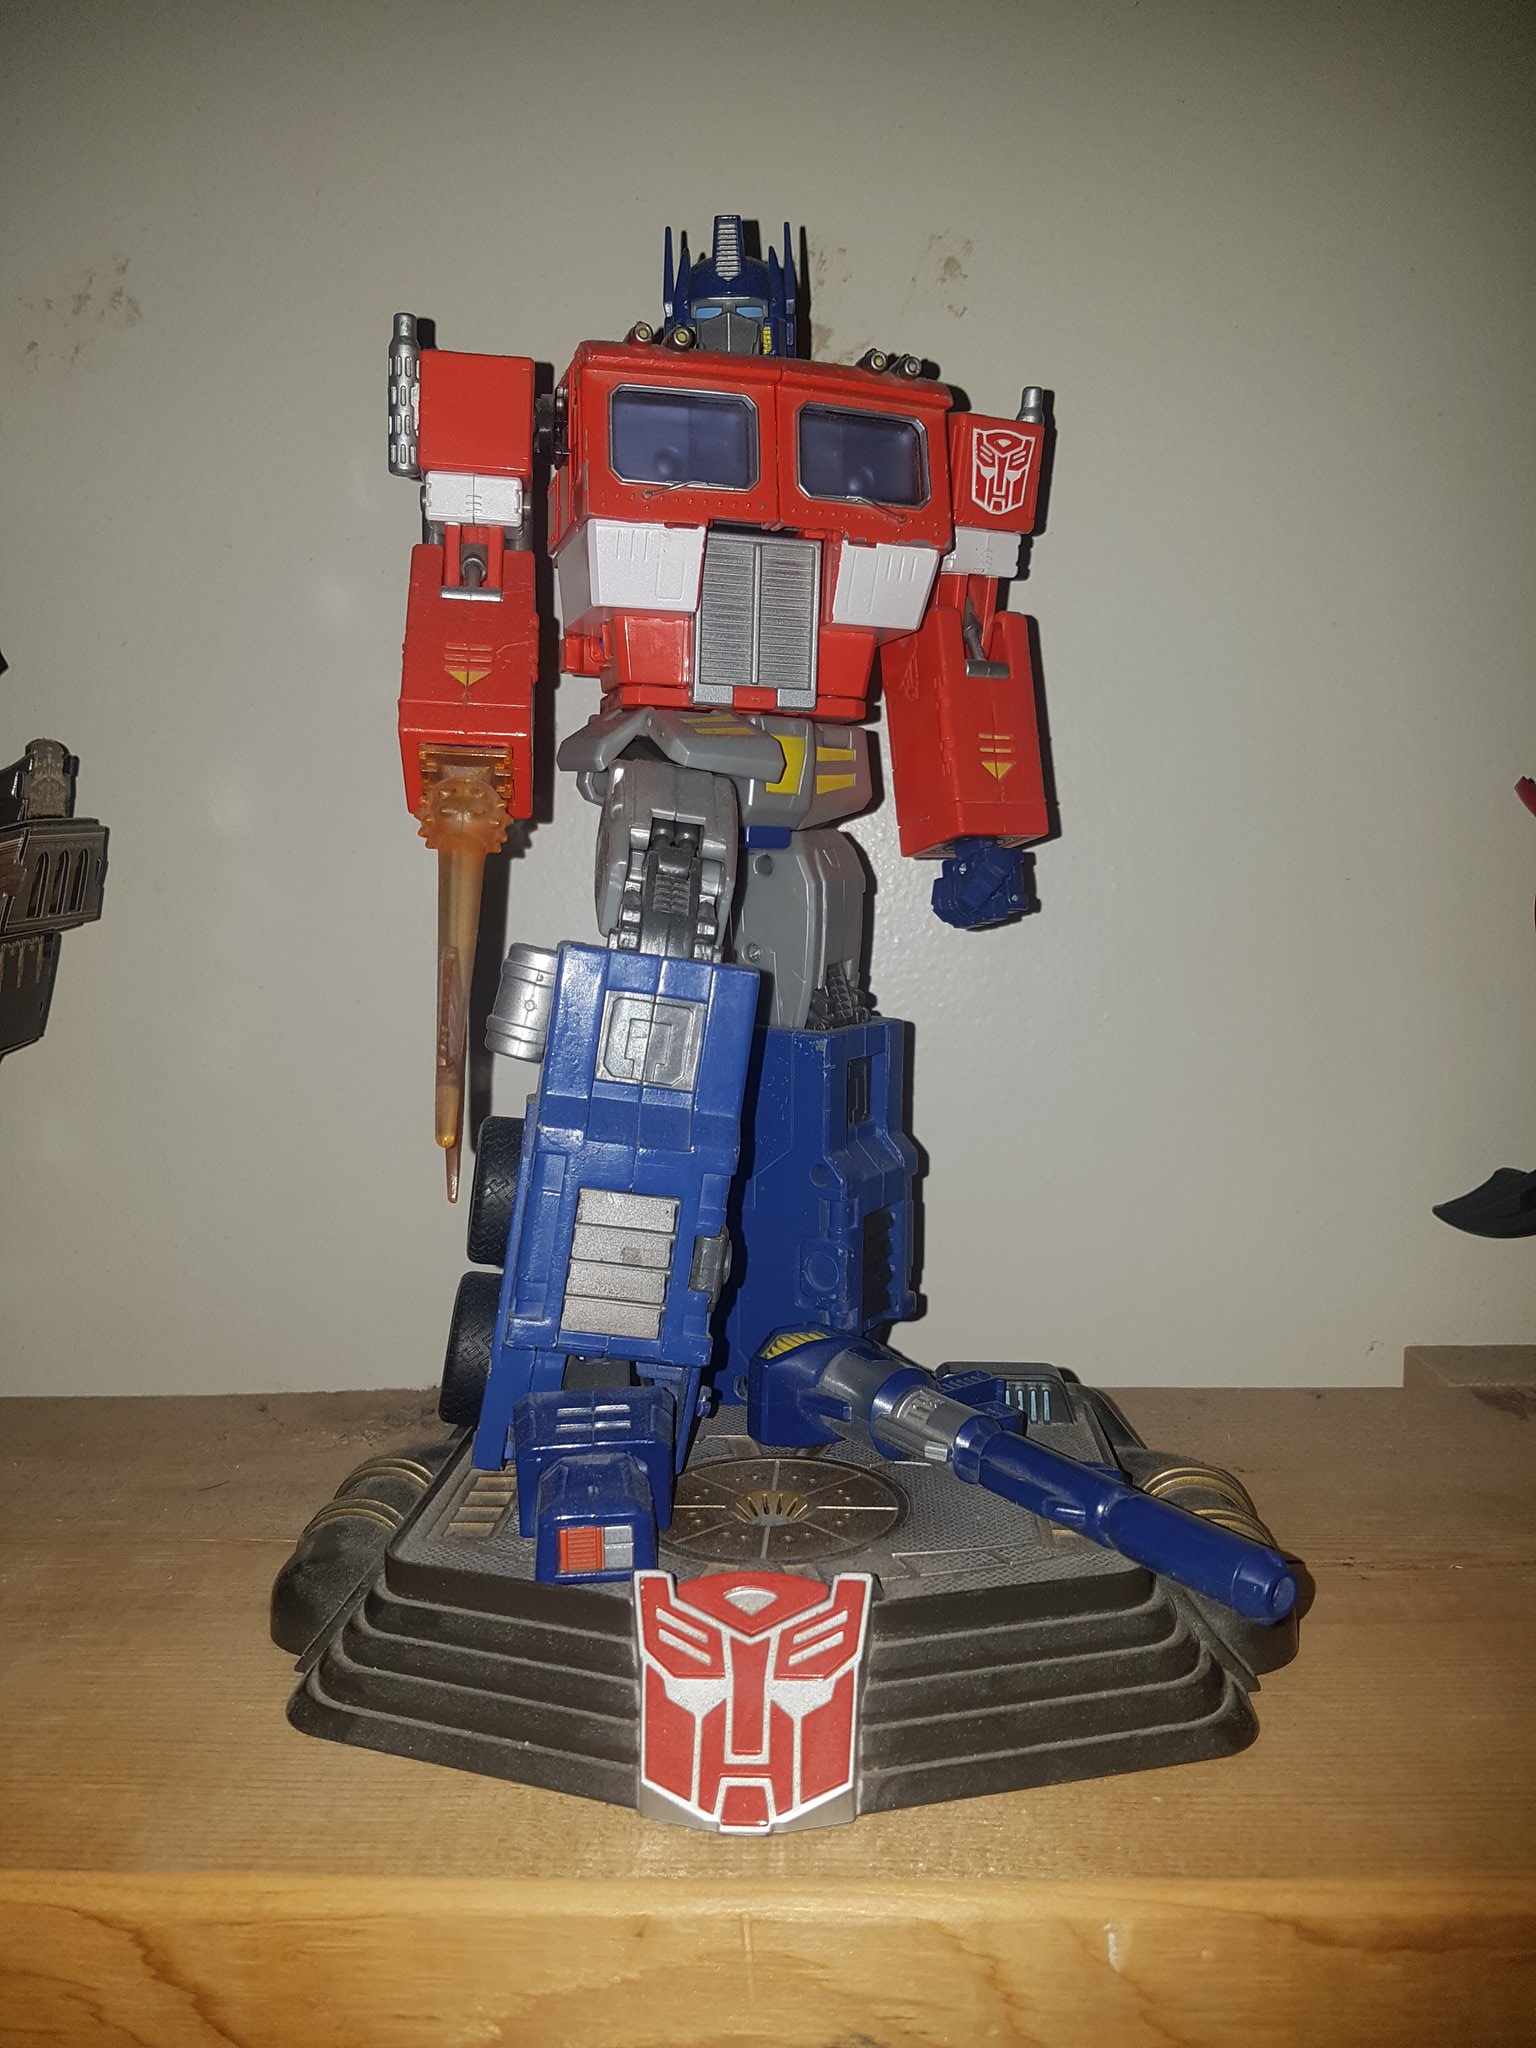 Here\s to the first, and best, Optimus Prime!  Happy birthday Peter Cullen!  Hope it was a good day for you! 